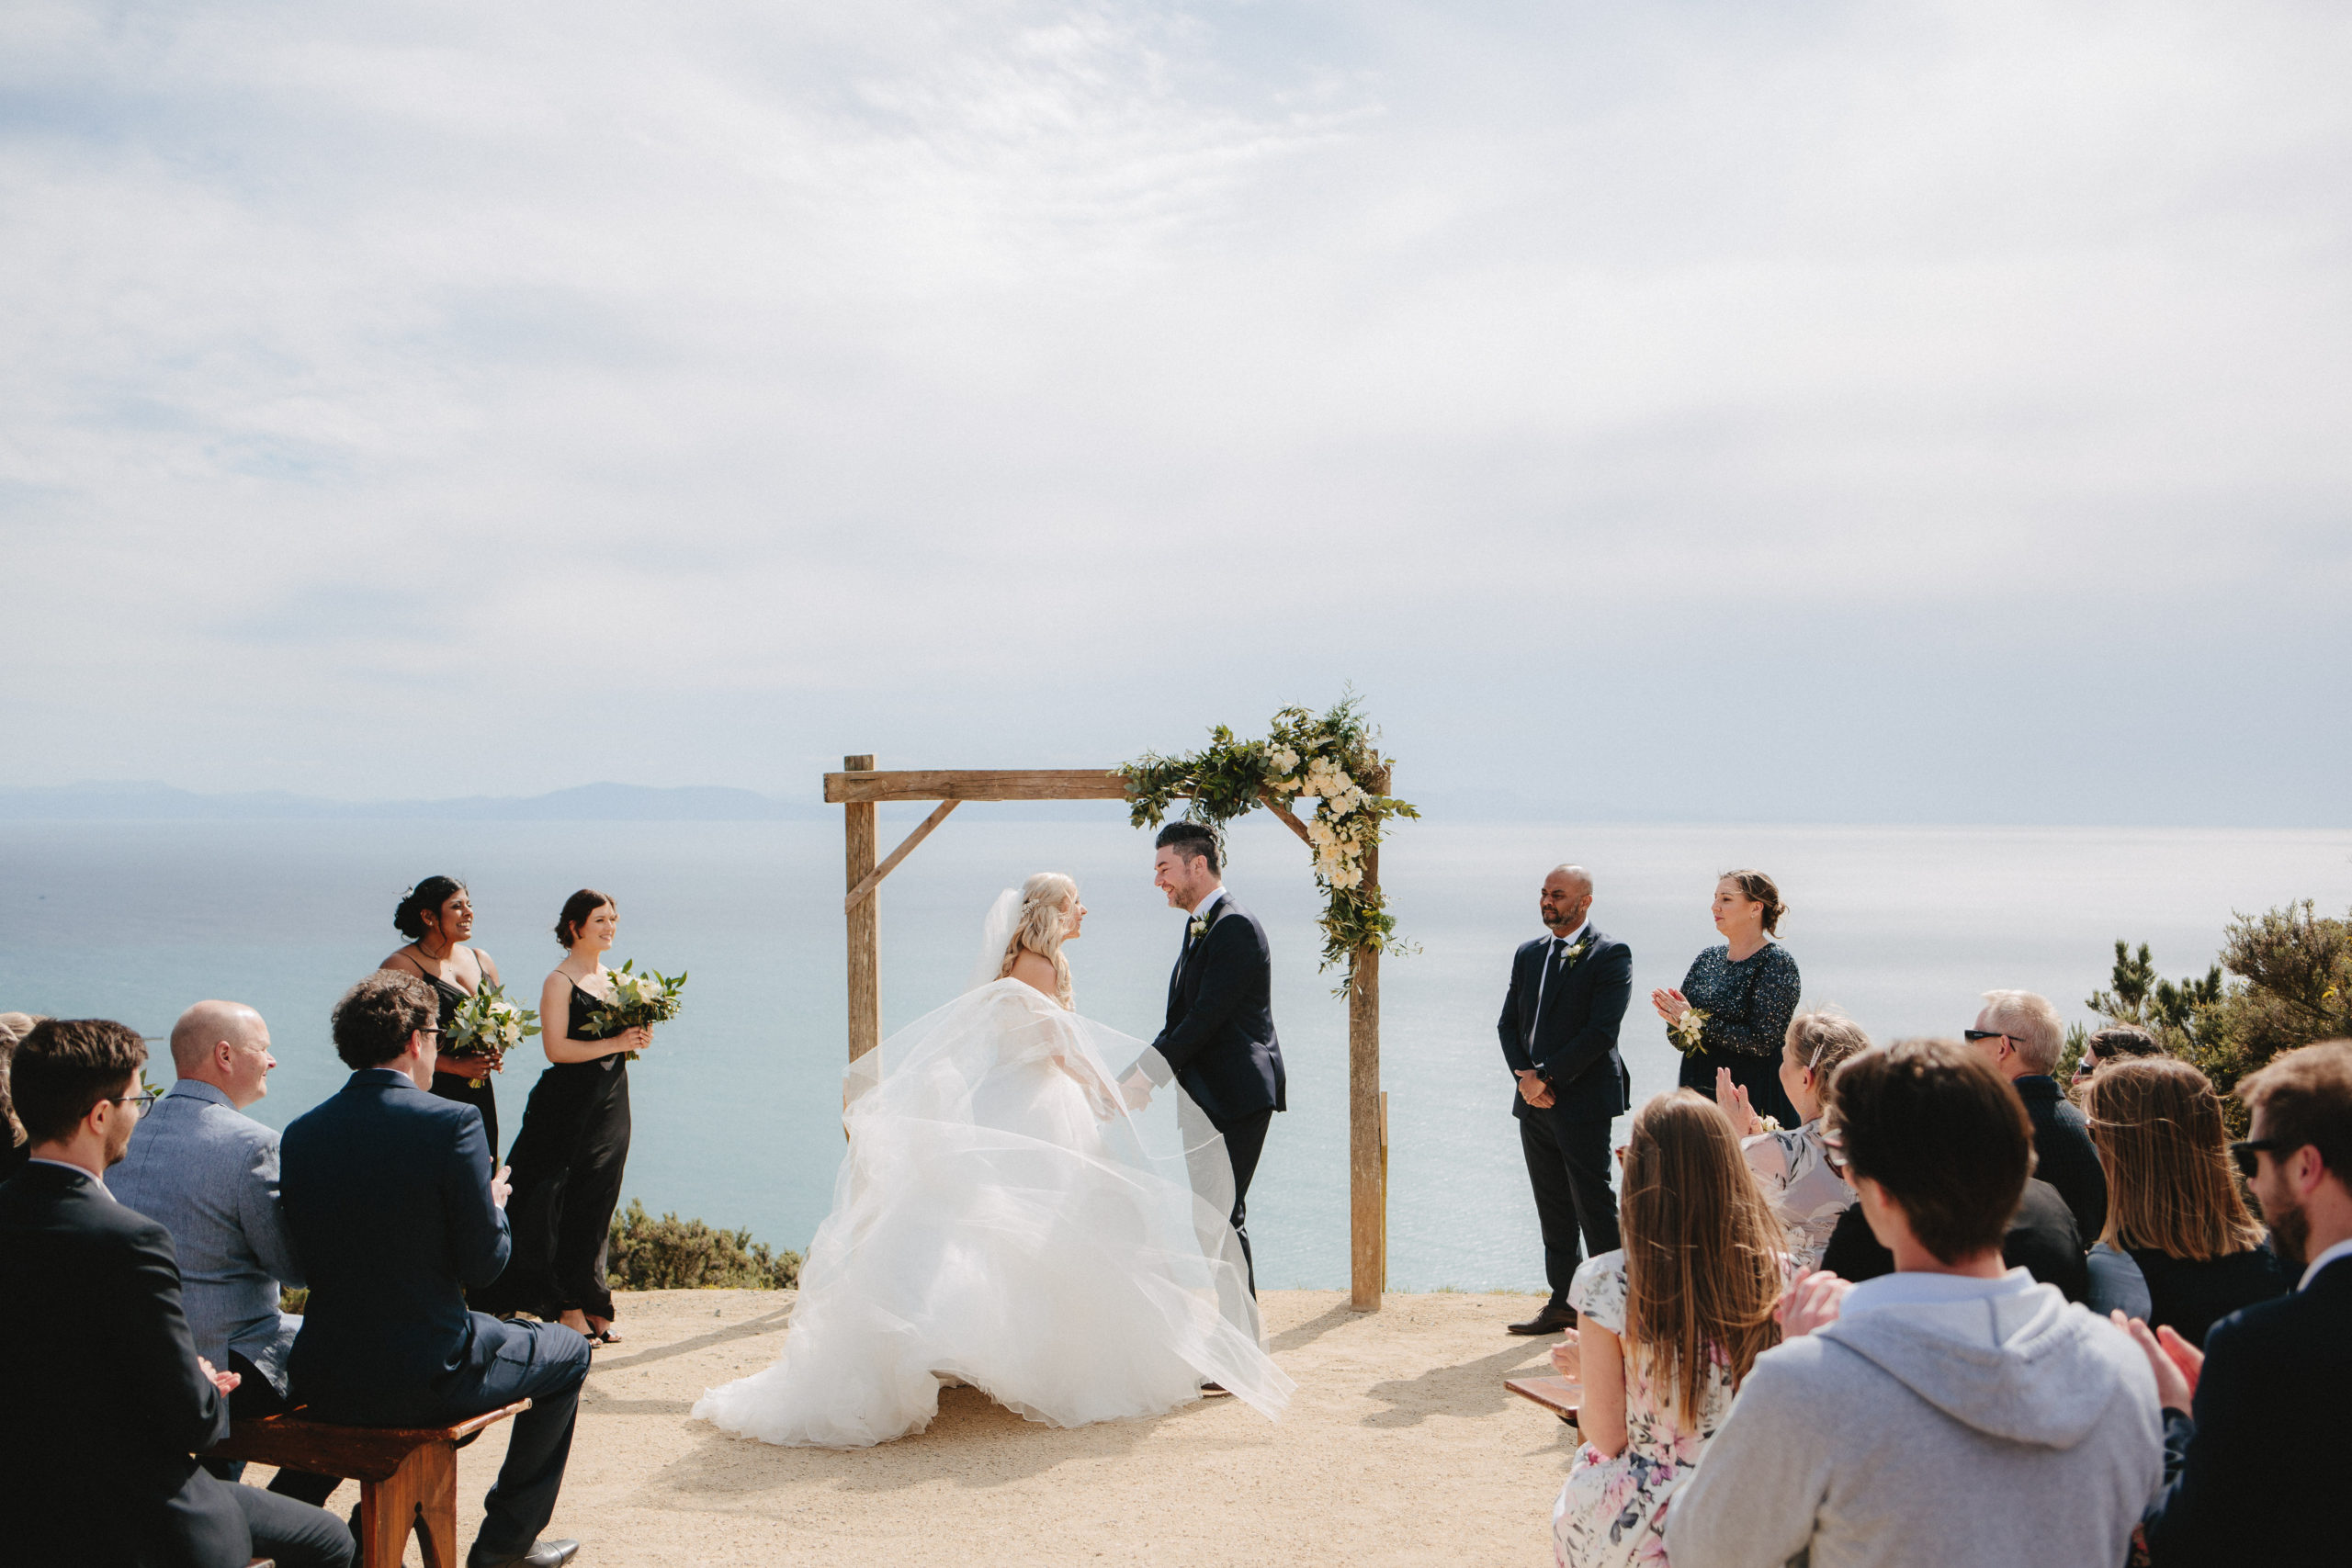 Saying their vows as brides dress catches the wind